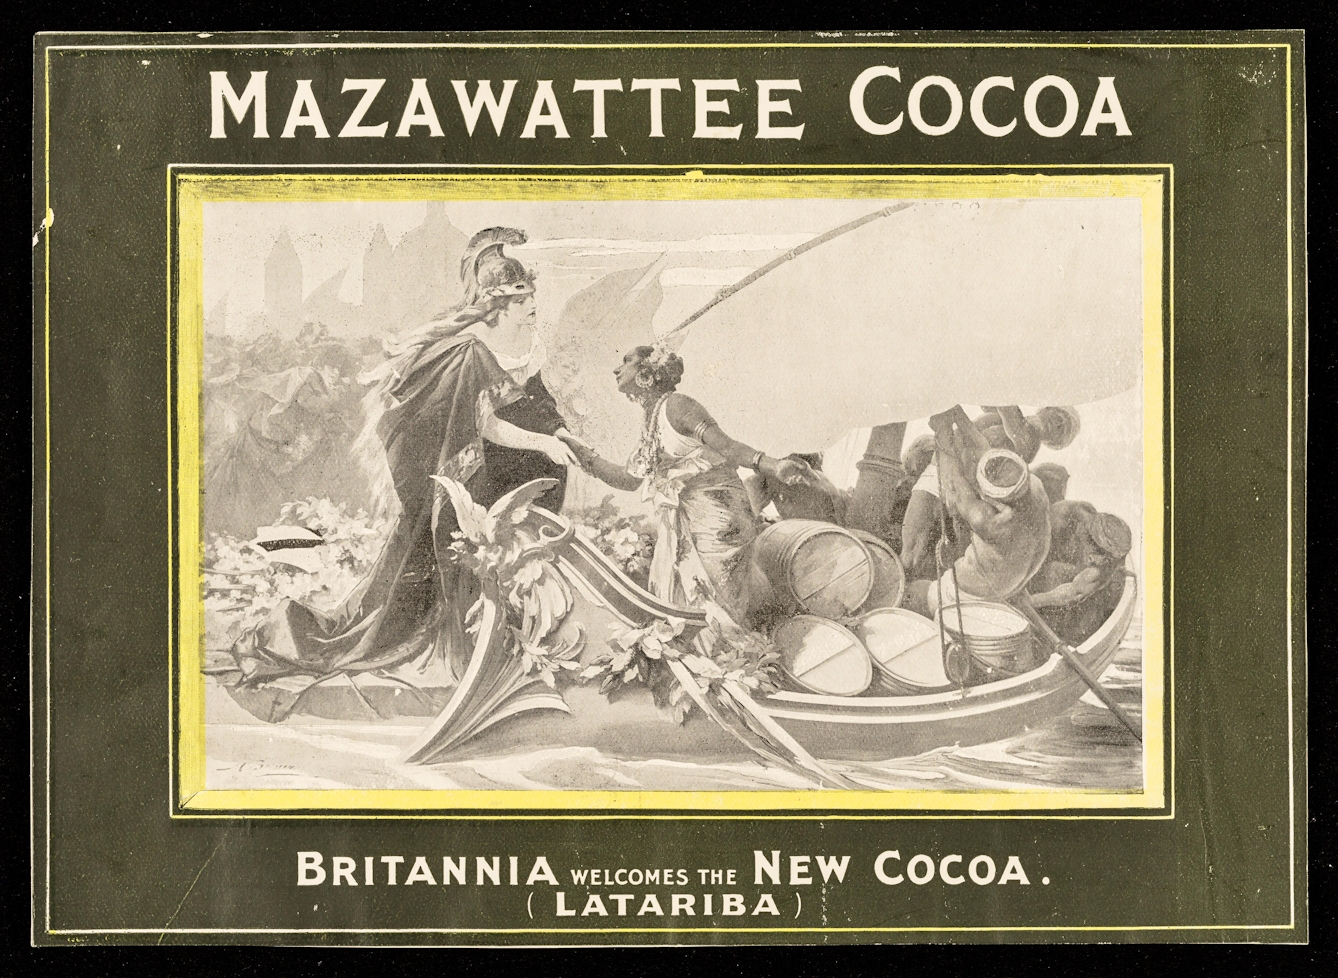 Black and white image with a colourful frame with lettering advertising Mazawattee Cocoa. The image shows a personified Britannia welcoming a woman in a small sailing boat packed with numerous barrels of cocoa.